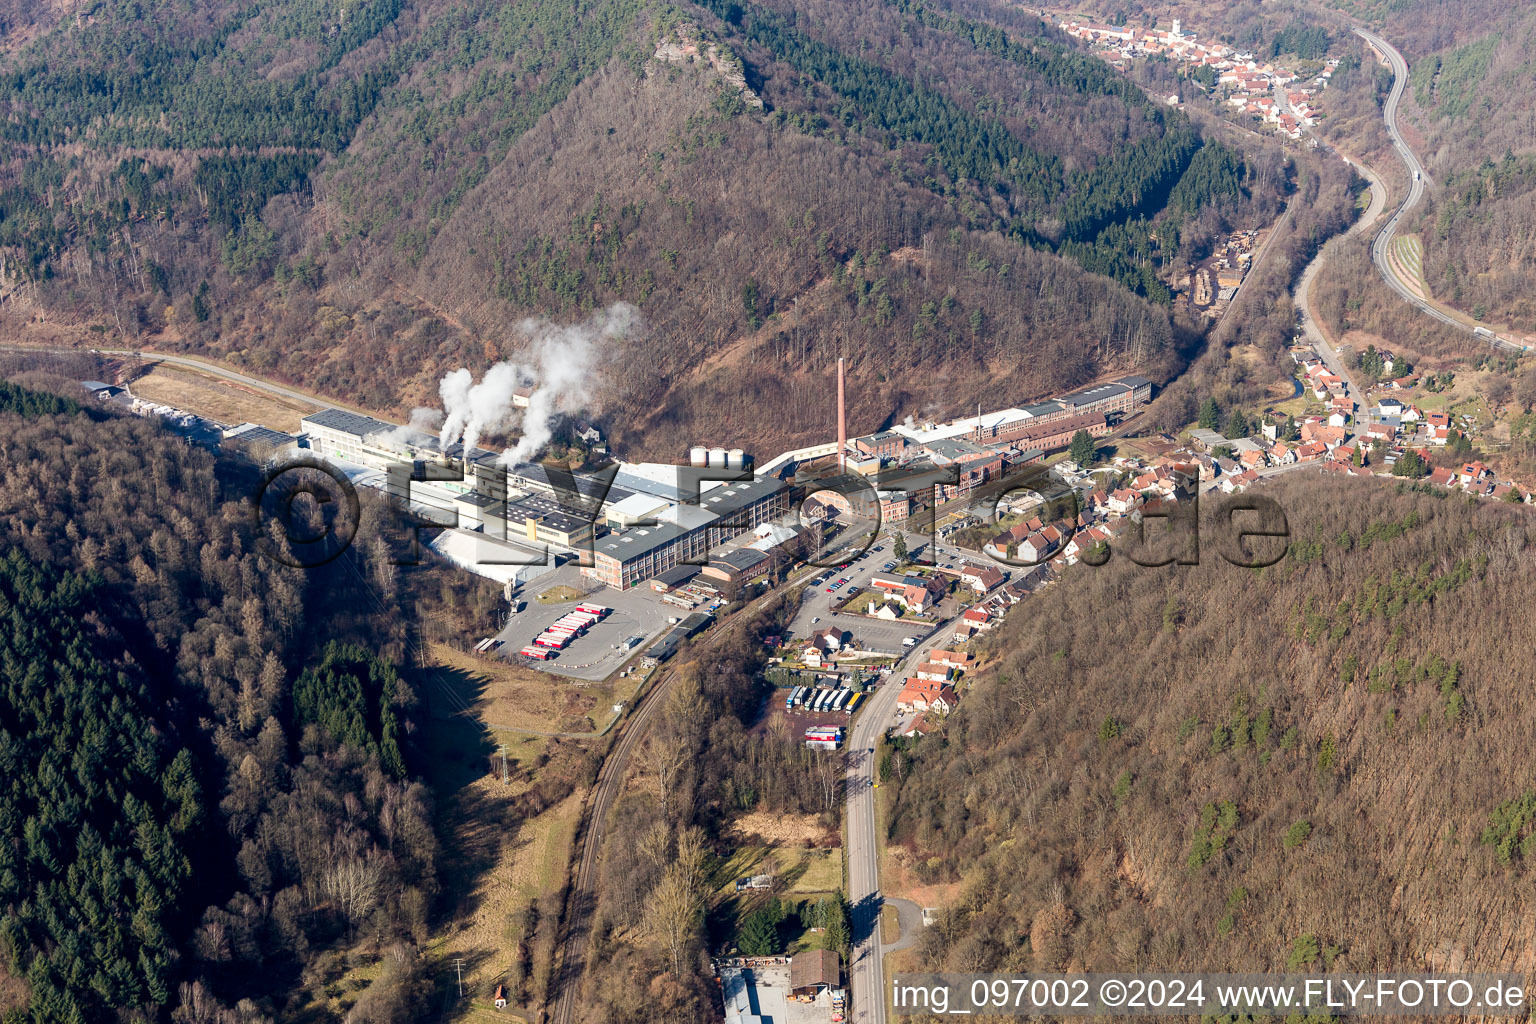 Aerial view of Building and production halls on the premises of Kartonfabrik Buchmann GmbH in the district Sarnstall in Annweiler am Trifels in the state Rhineland-Palatinate, Germany